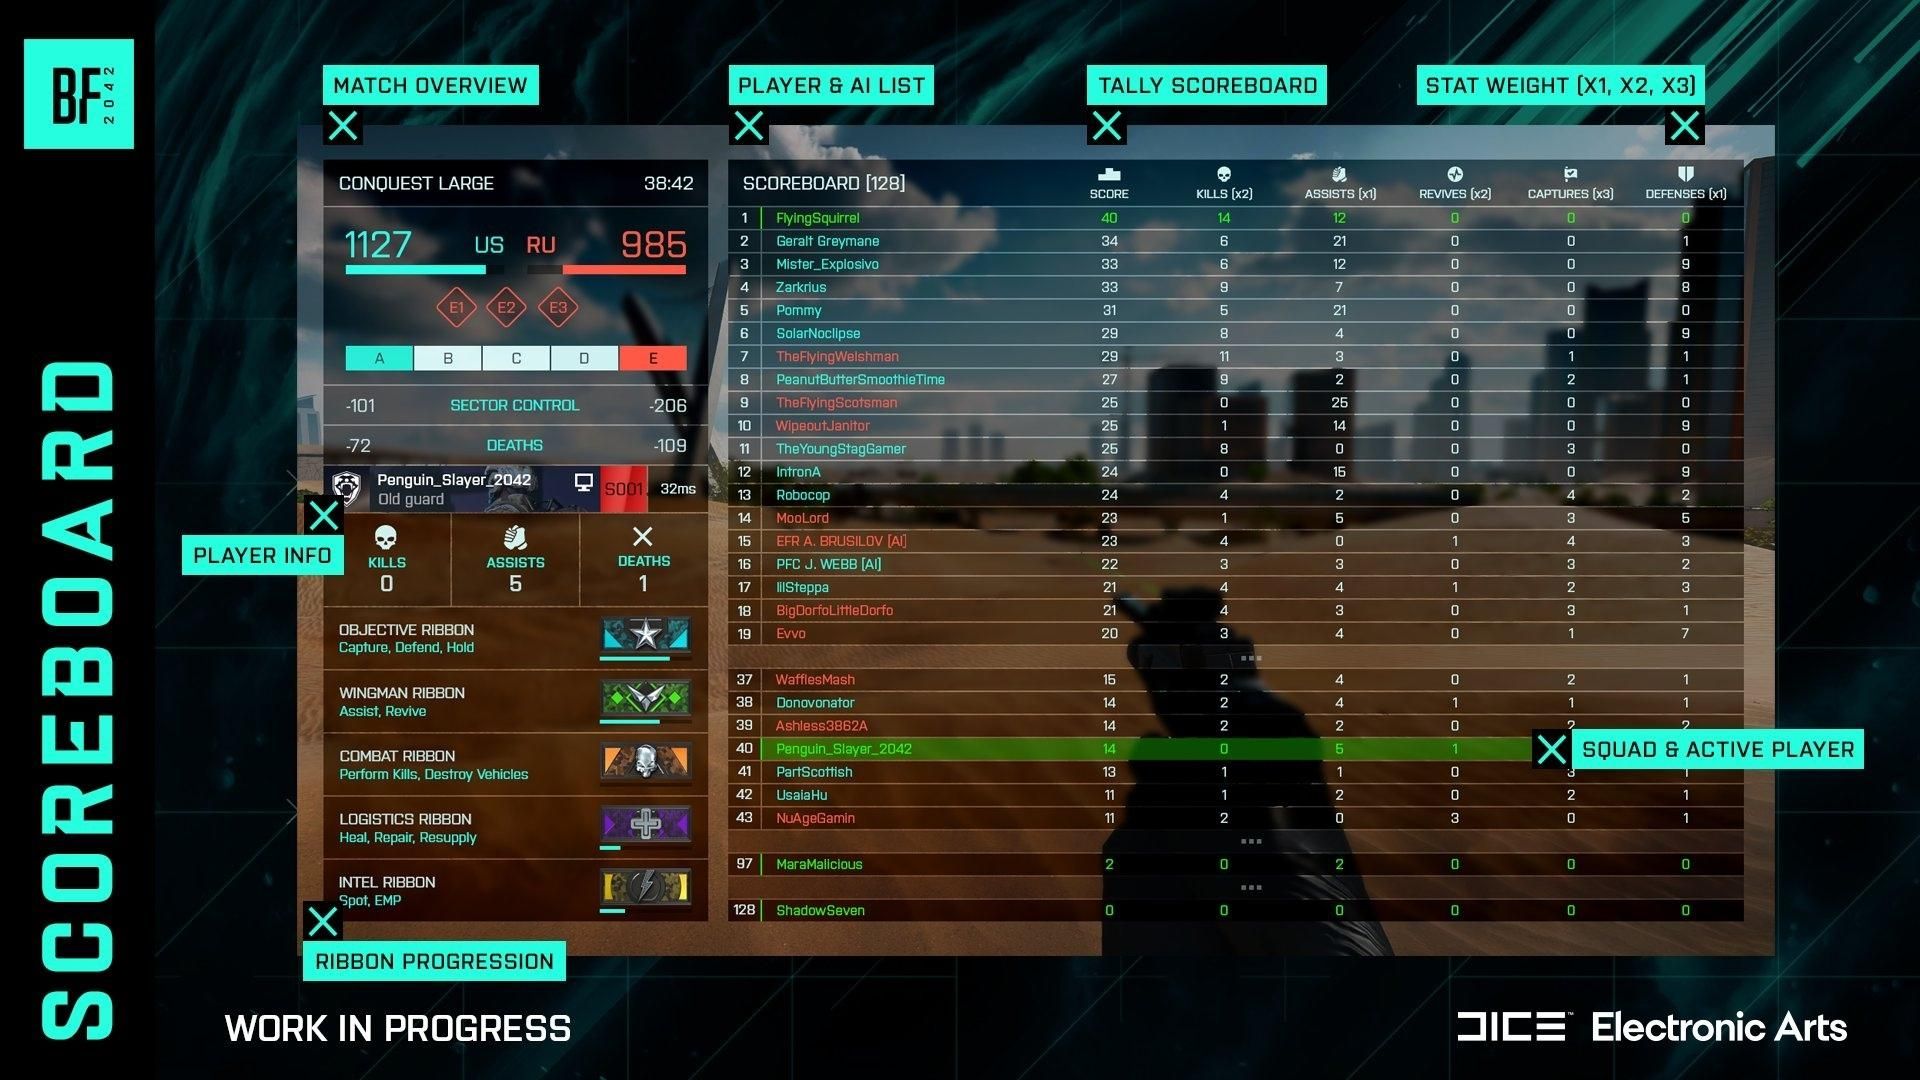 Battlefield 2042's new scoreboard adds scores, kills, and other important info